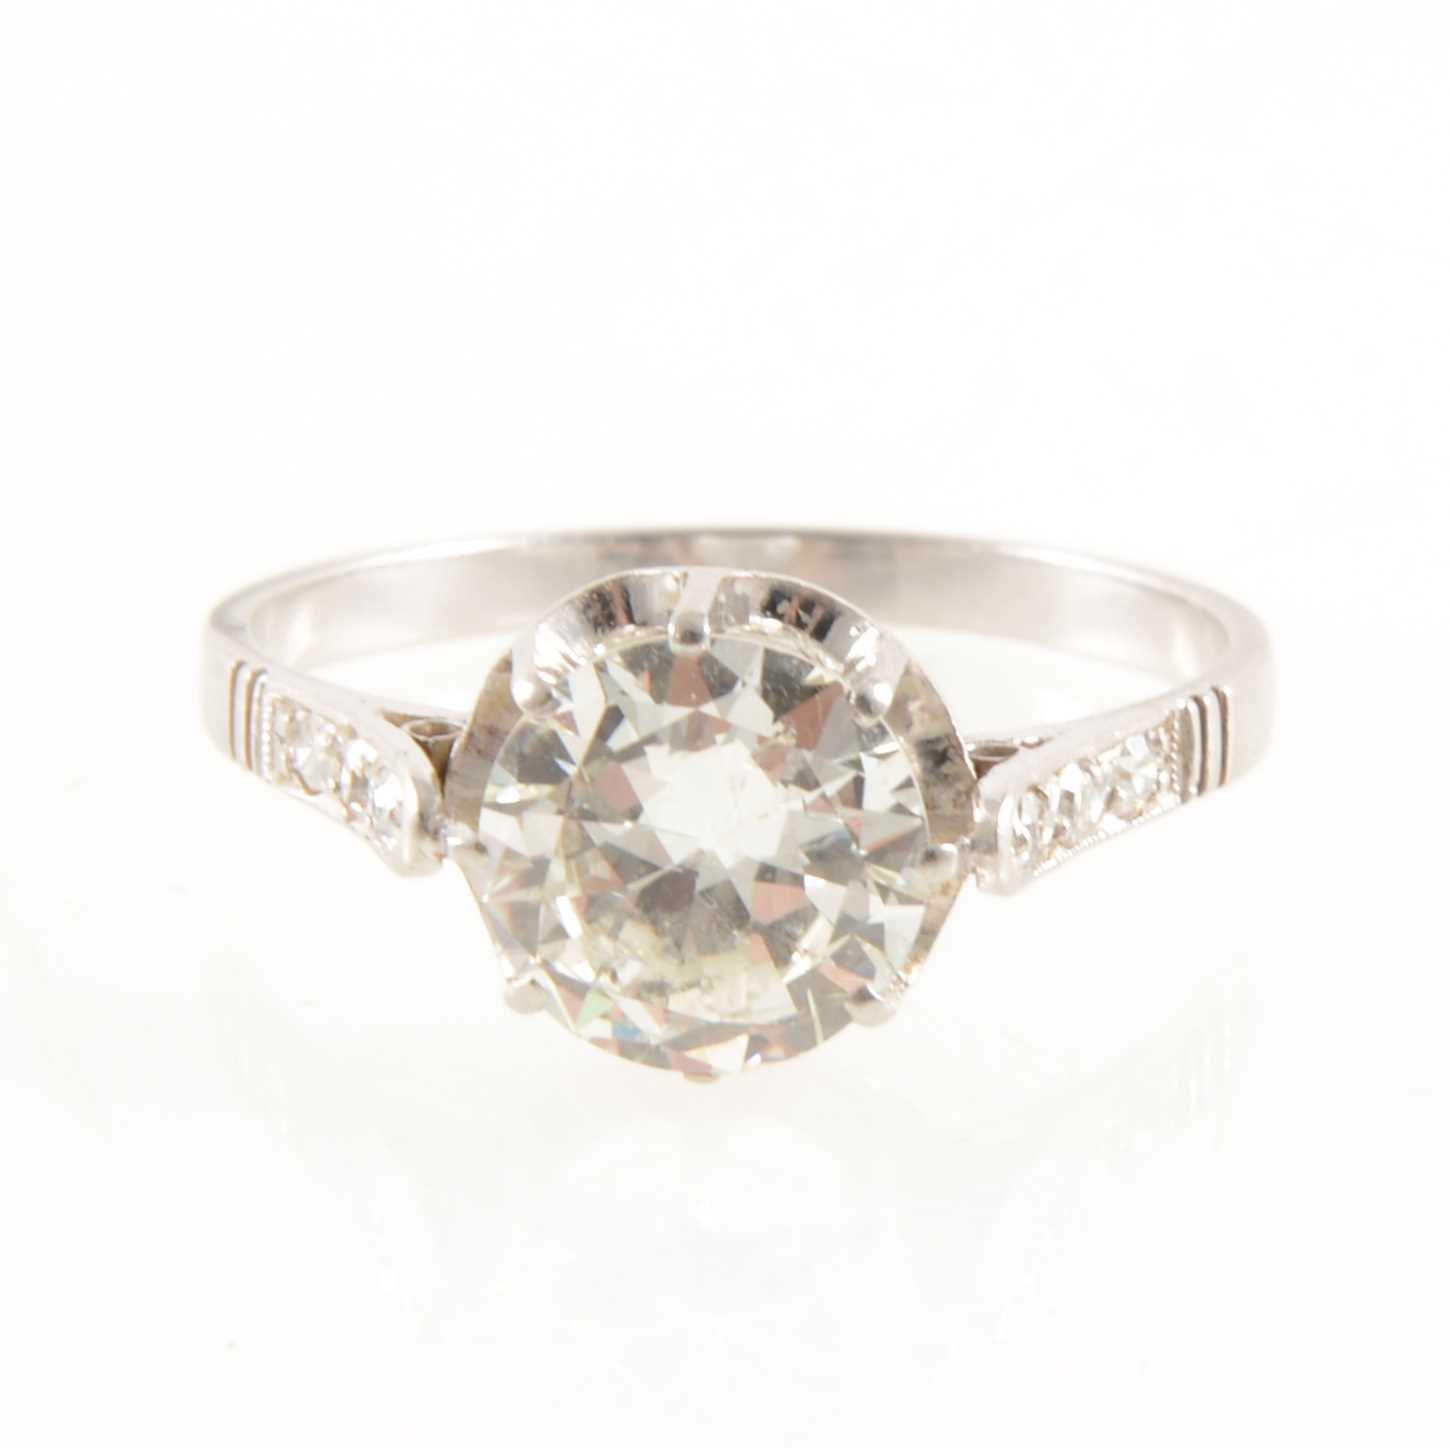 Lot 237 - A diamond solitaire ring,  approximate weight of major diamond 1.65 carat.